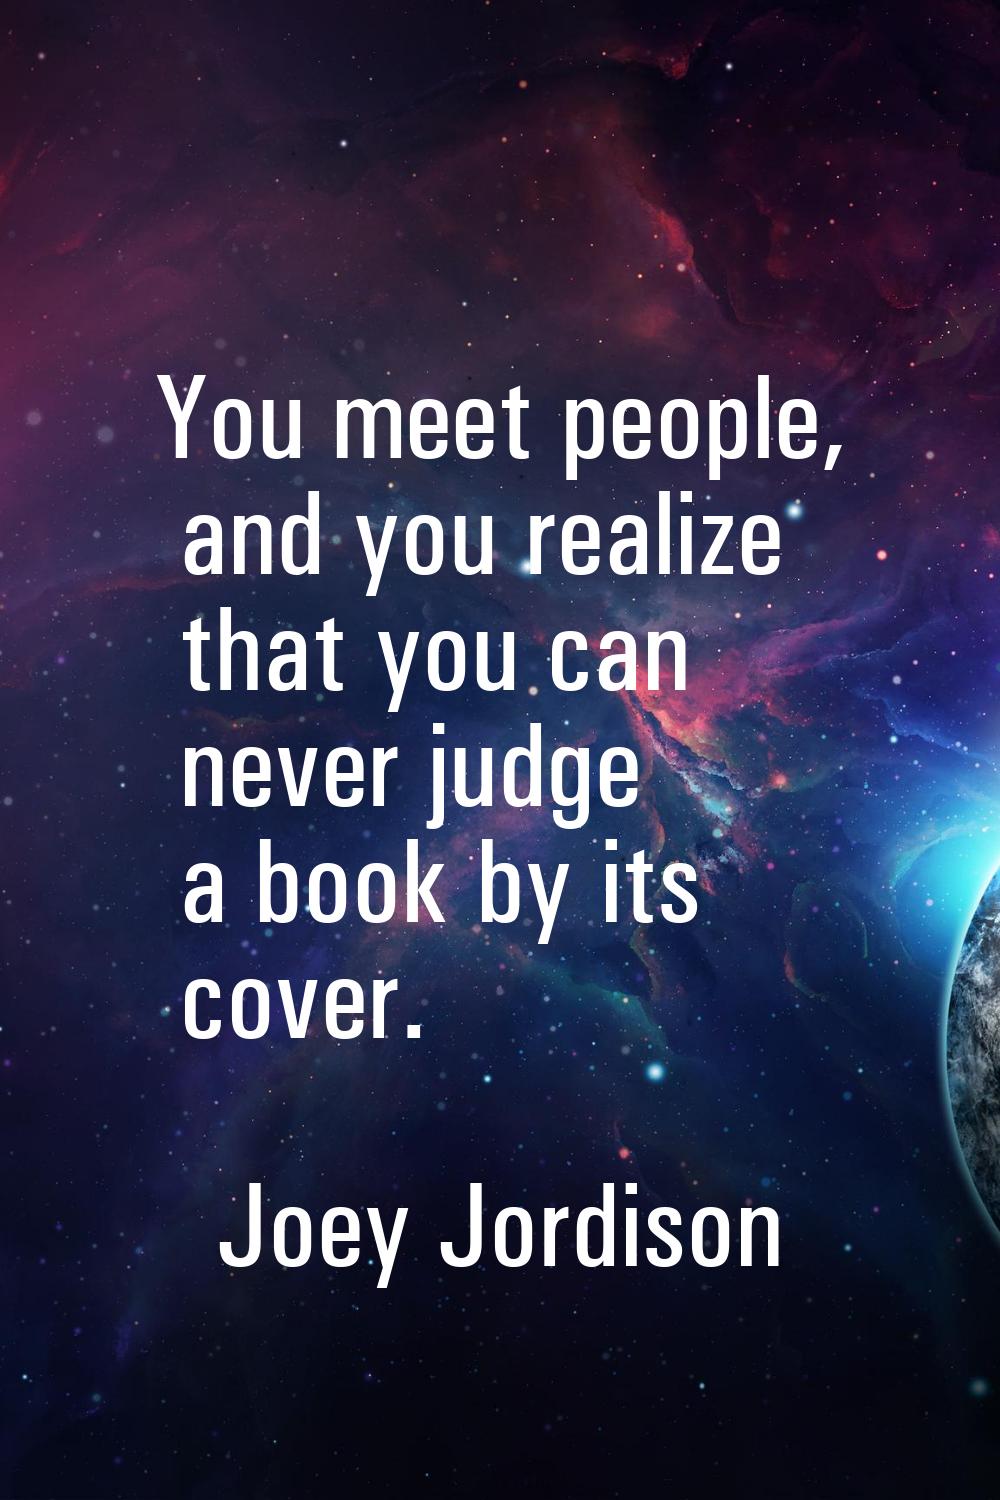 You meet people, and you realize that you can never judge a book by its cover.